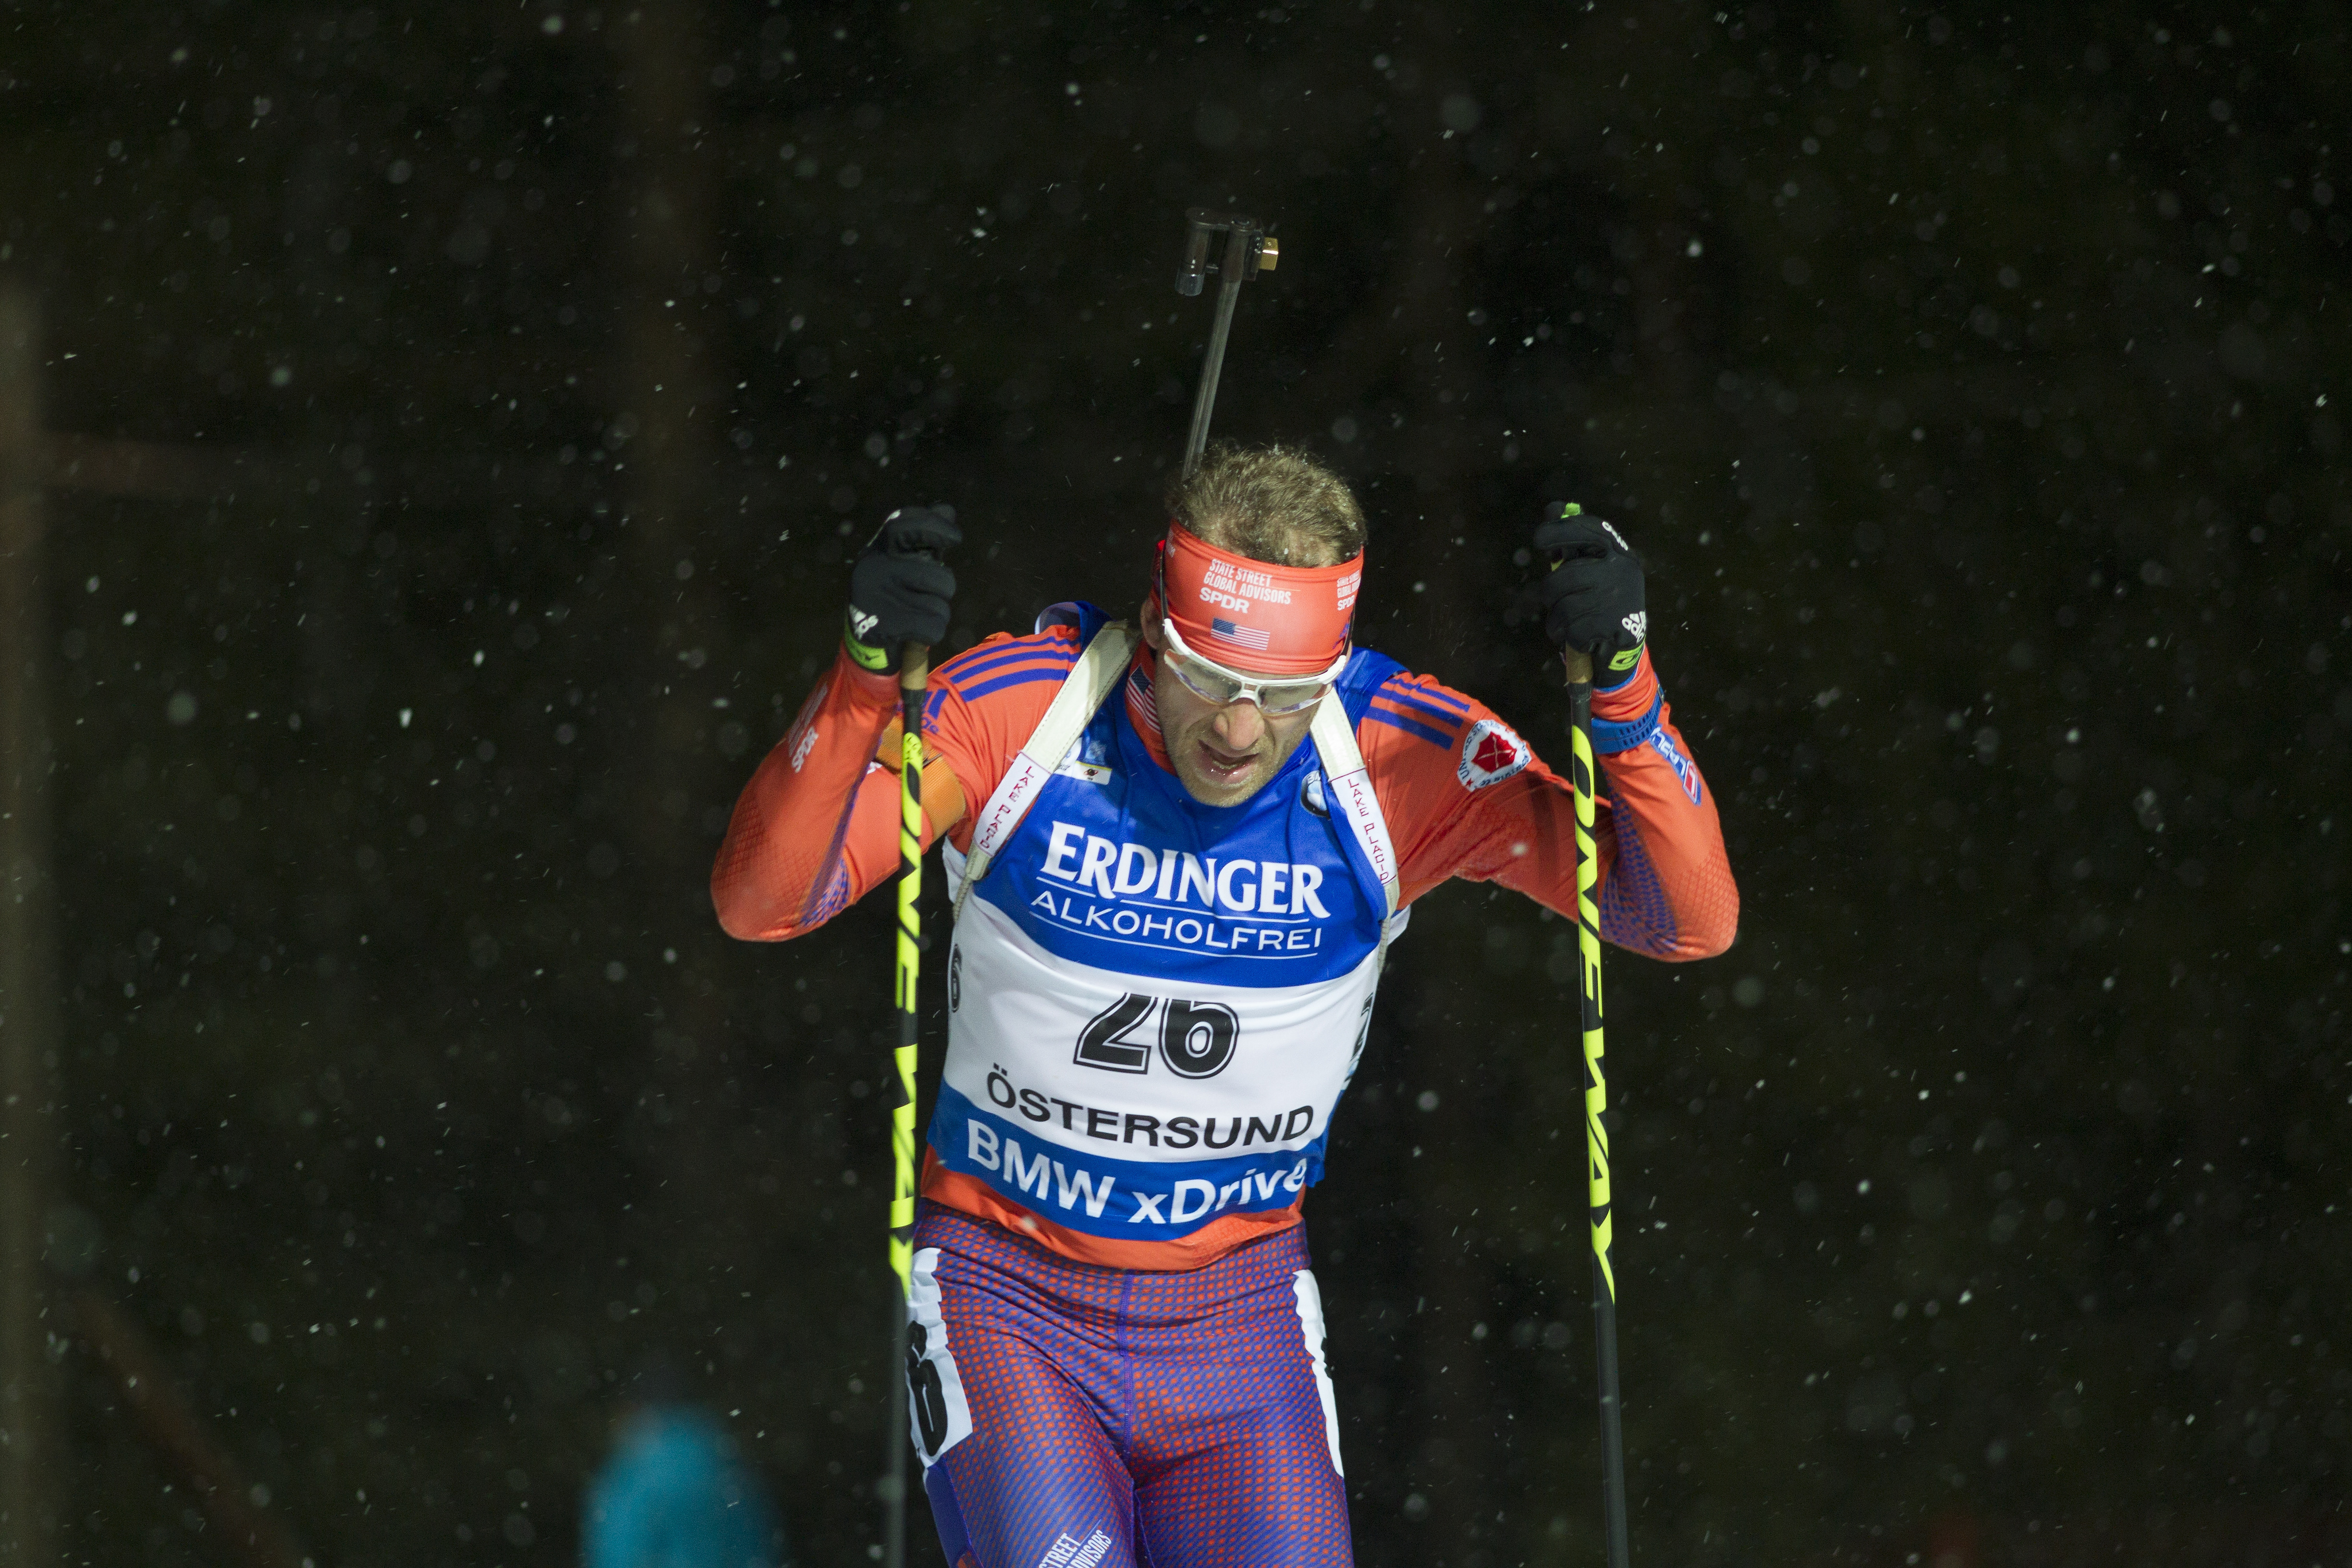 Lowell Bailey on course. Bailey was clean through three stages, which would have put him in the top 10, but he missed two shots in the final standing stage. (Photo: U.S. Biathlon/NordicFocus)